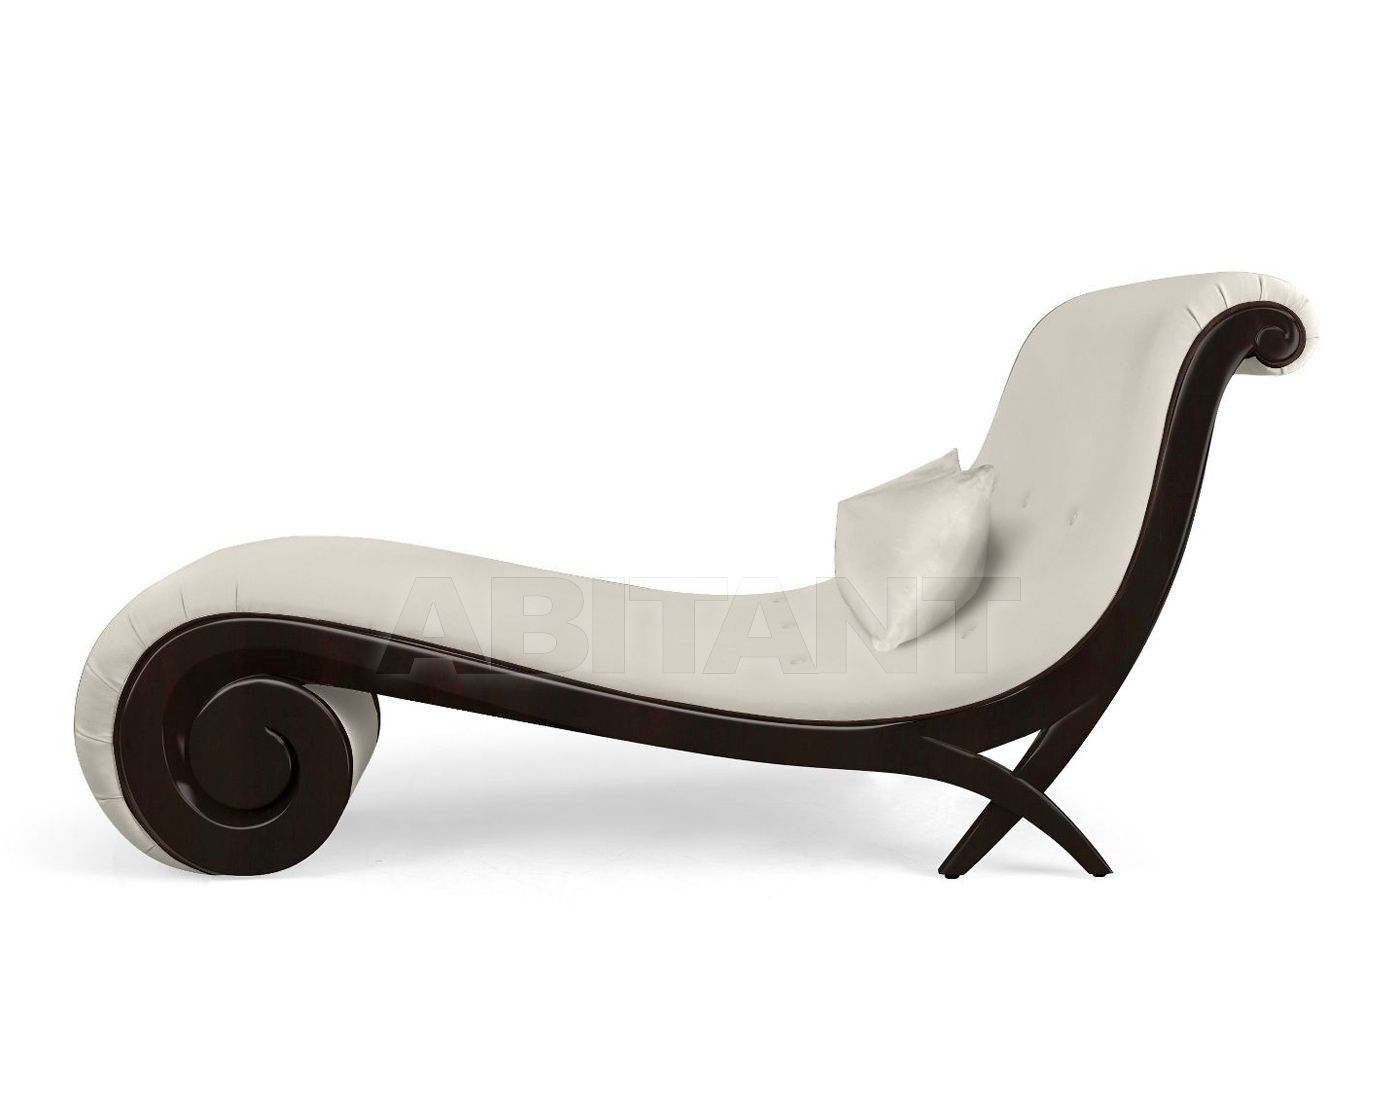 Buy Couch Le Meurice Christopher Guy 2014 60-0107-CC Moonstone